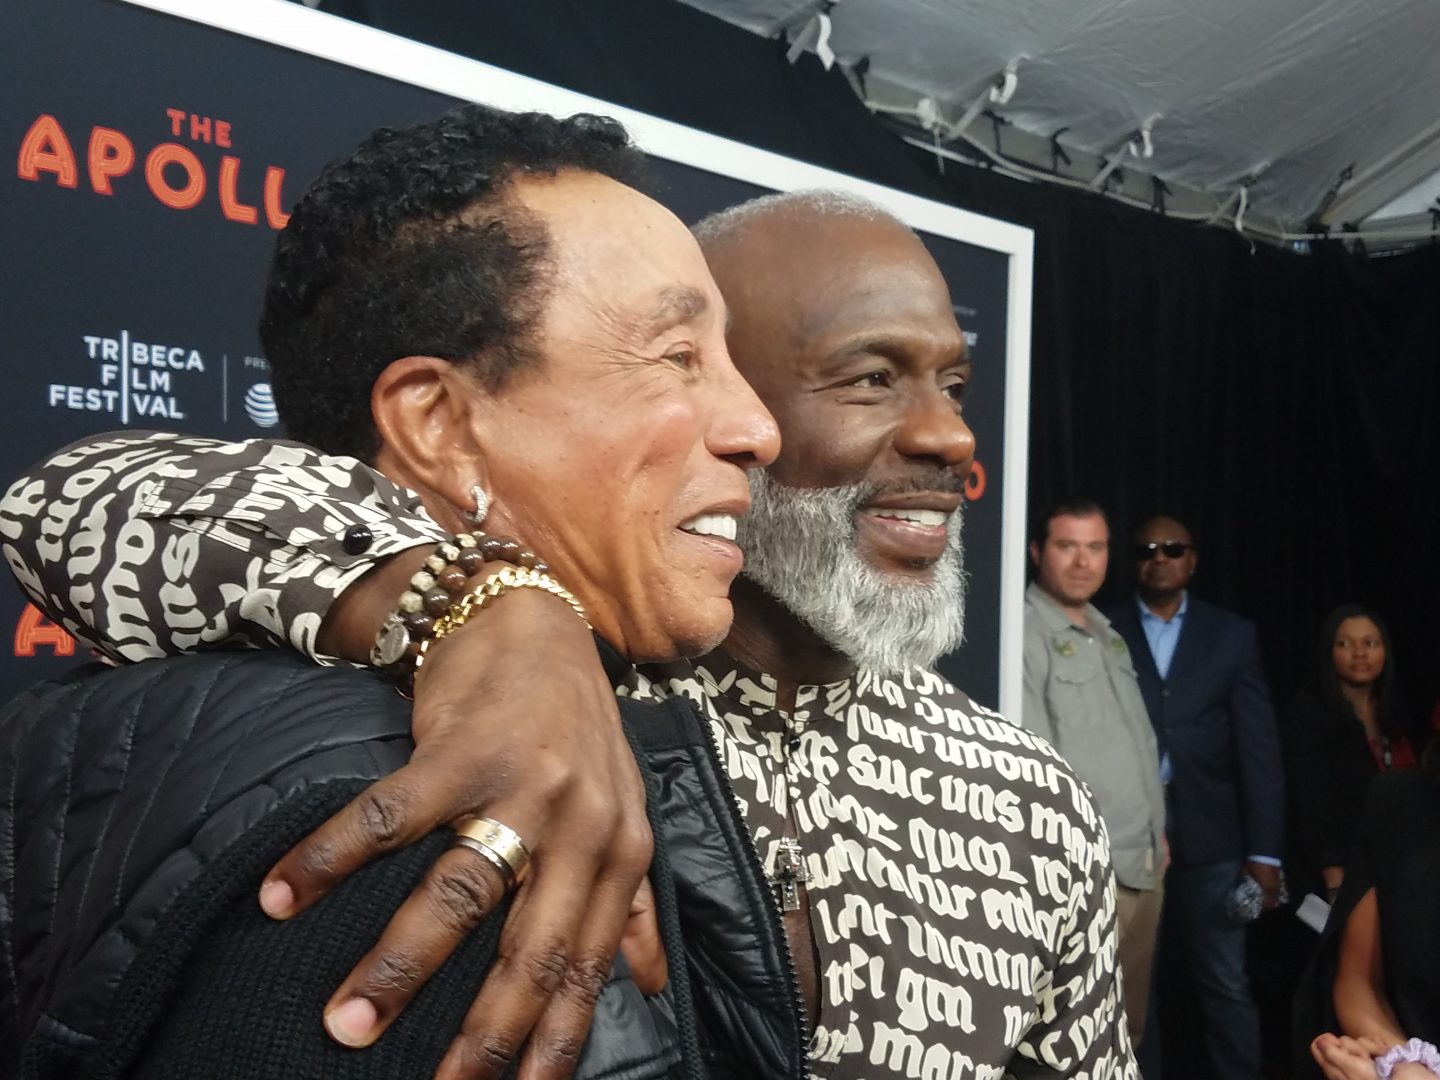 Smokey Robinson and BeBe Winans at the Tribeca Film Festival premiere of the HBO Film The Apollo (Photo by Derrel Jazz Johnson for Steed Media Service)